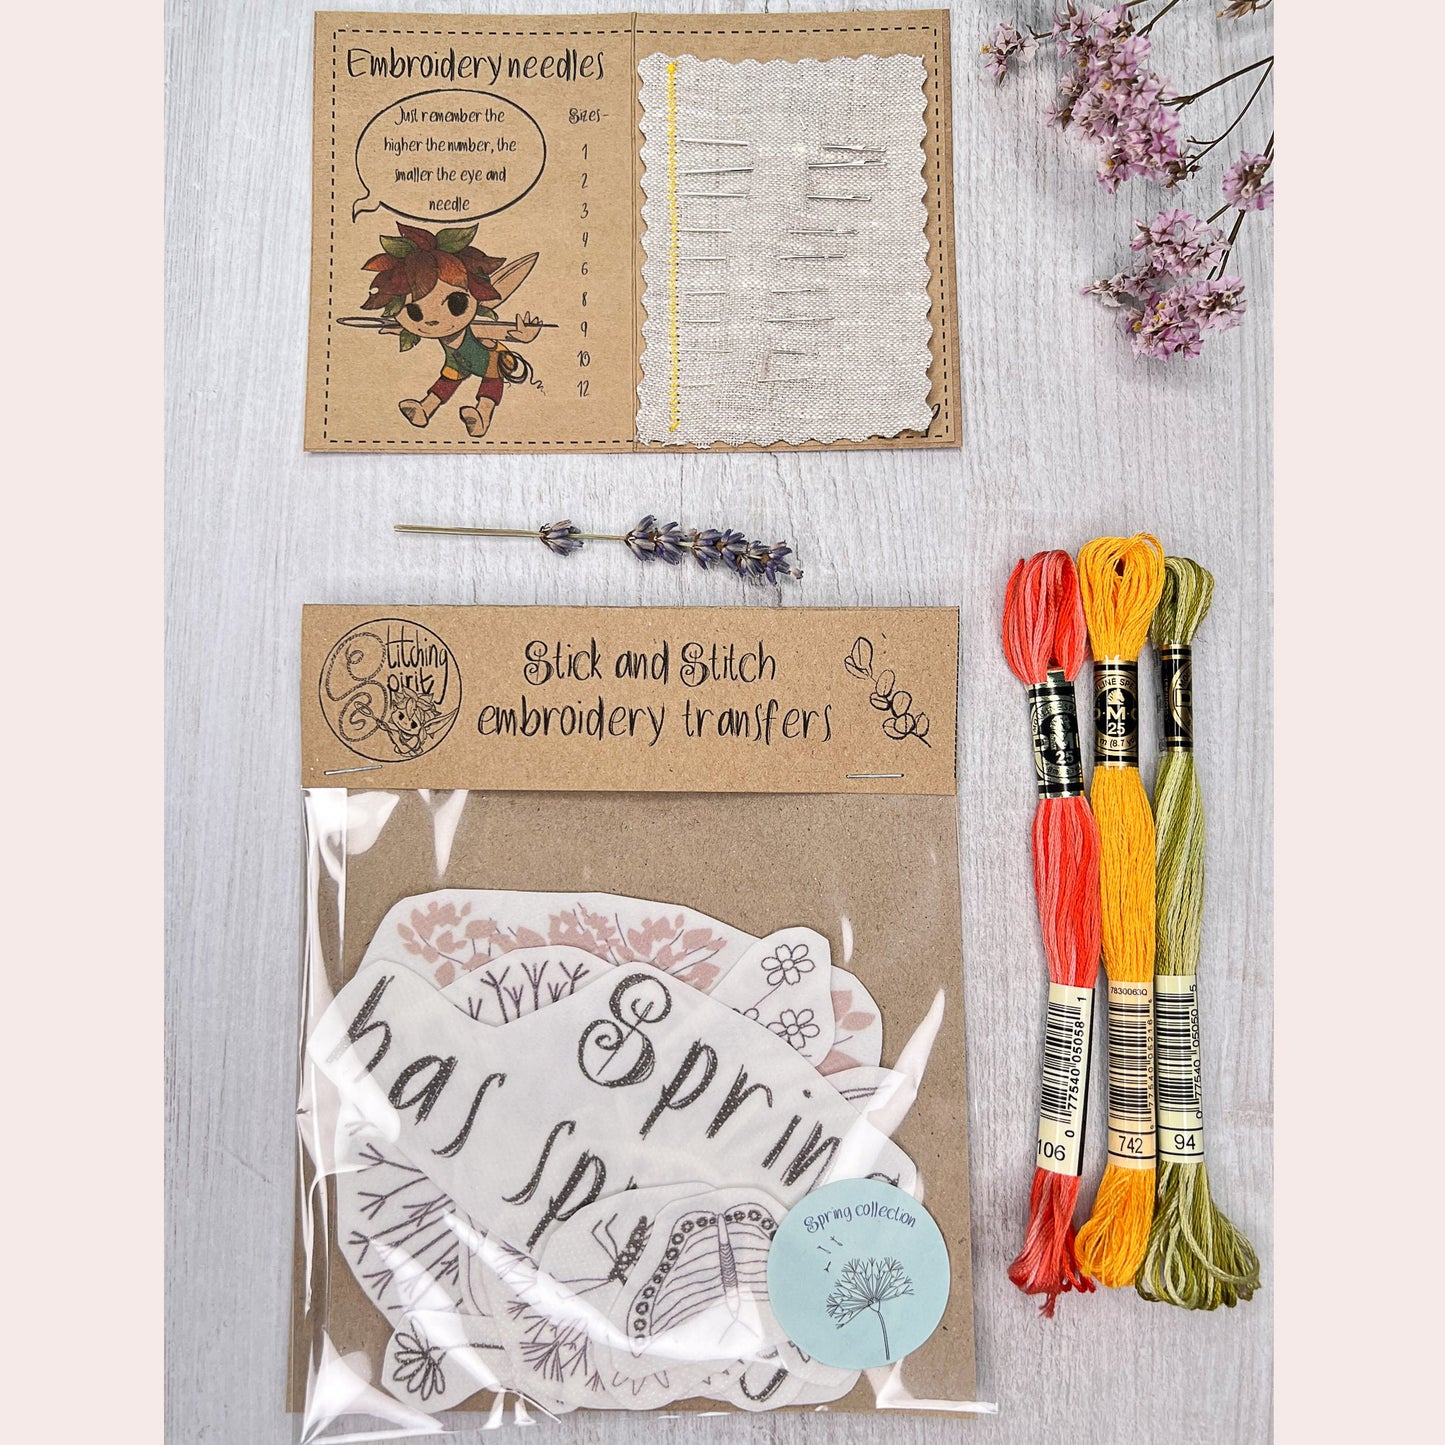 Stick and Stitch set with threads and needles kit